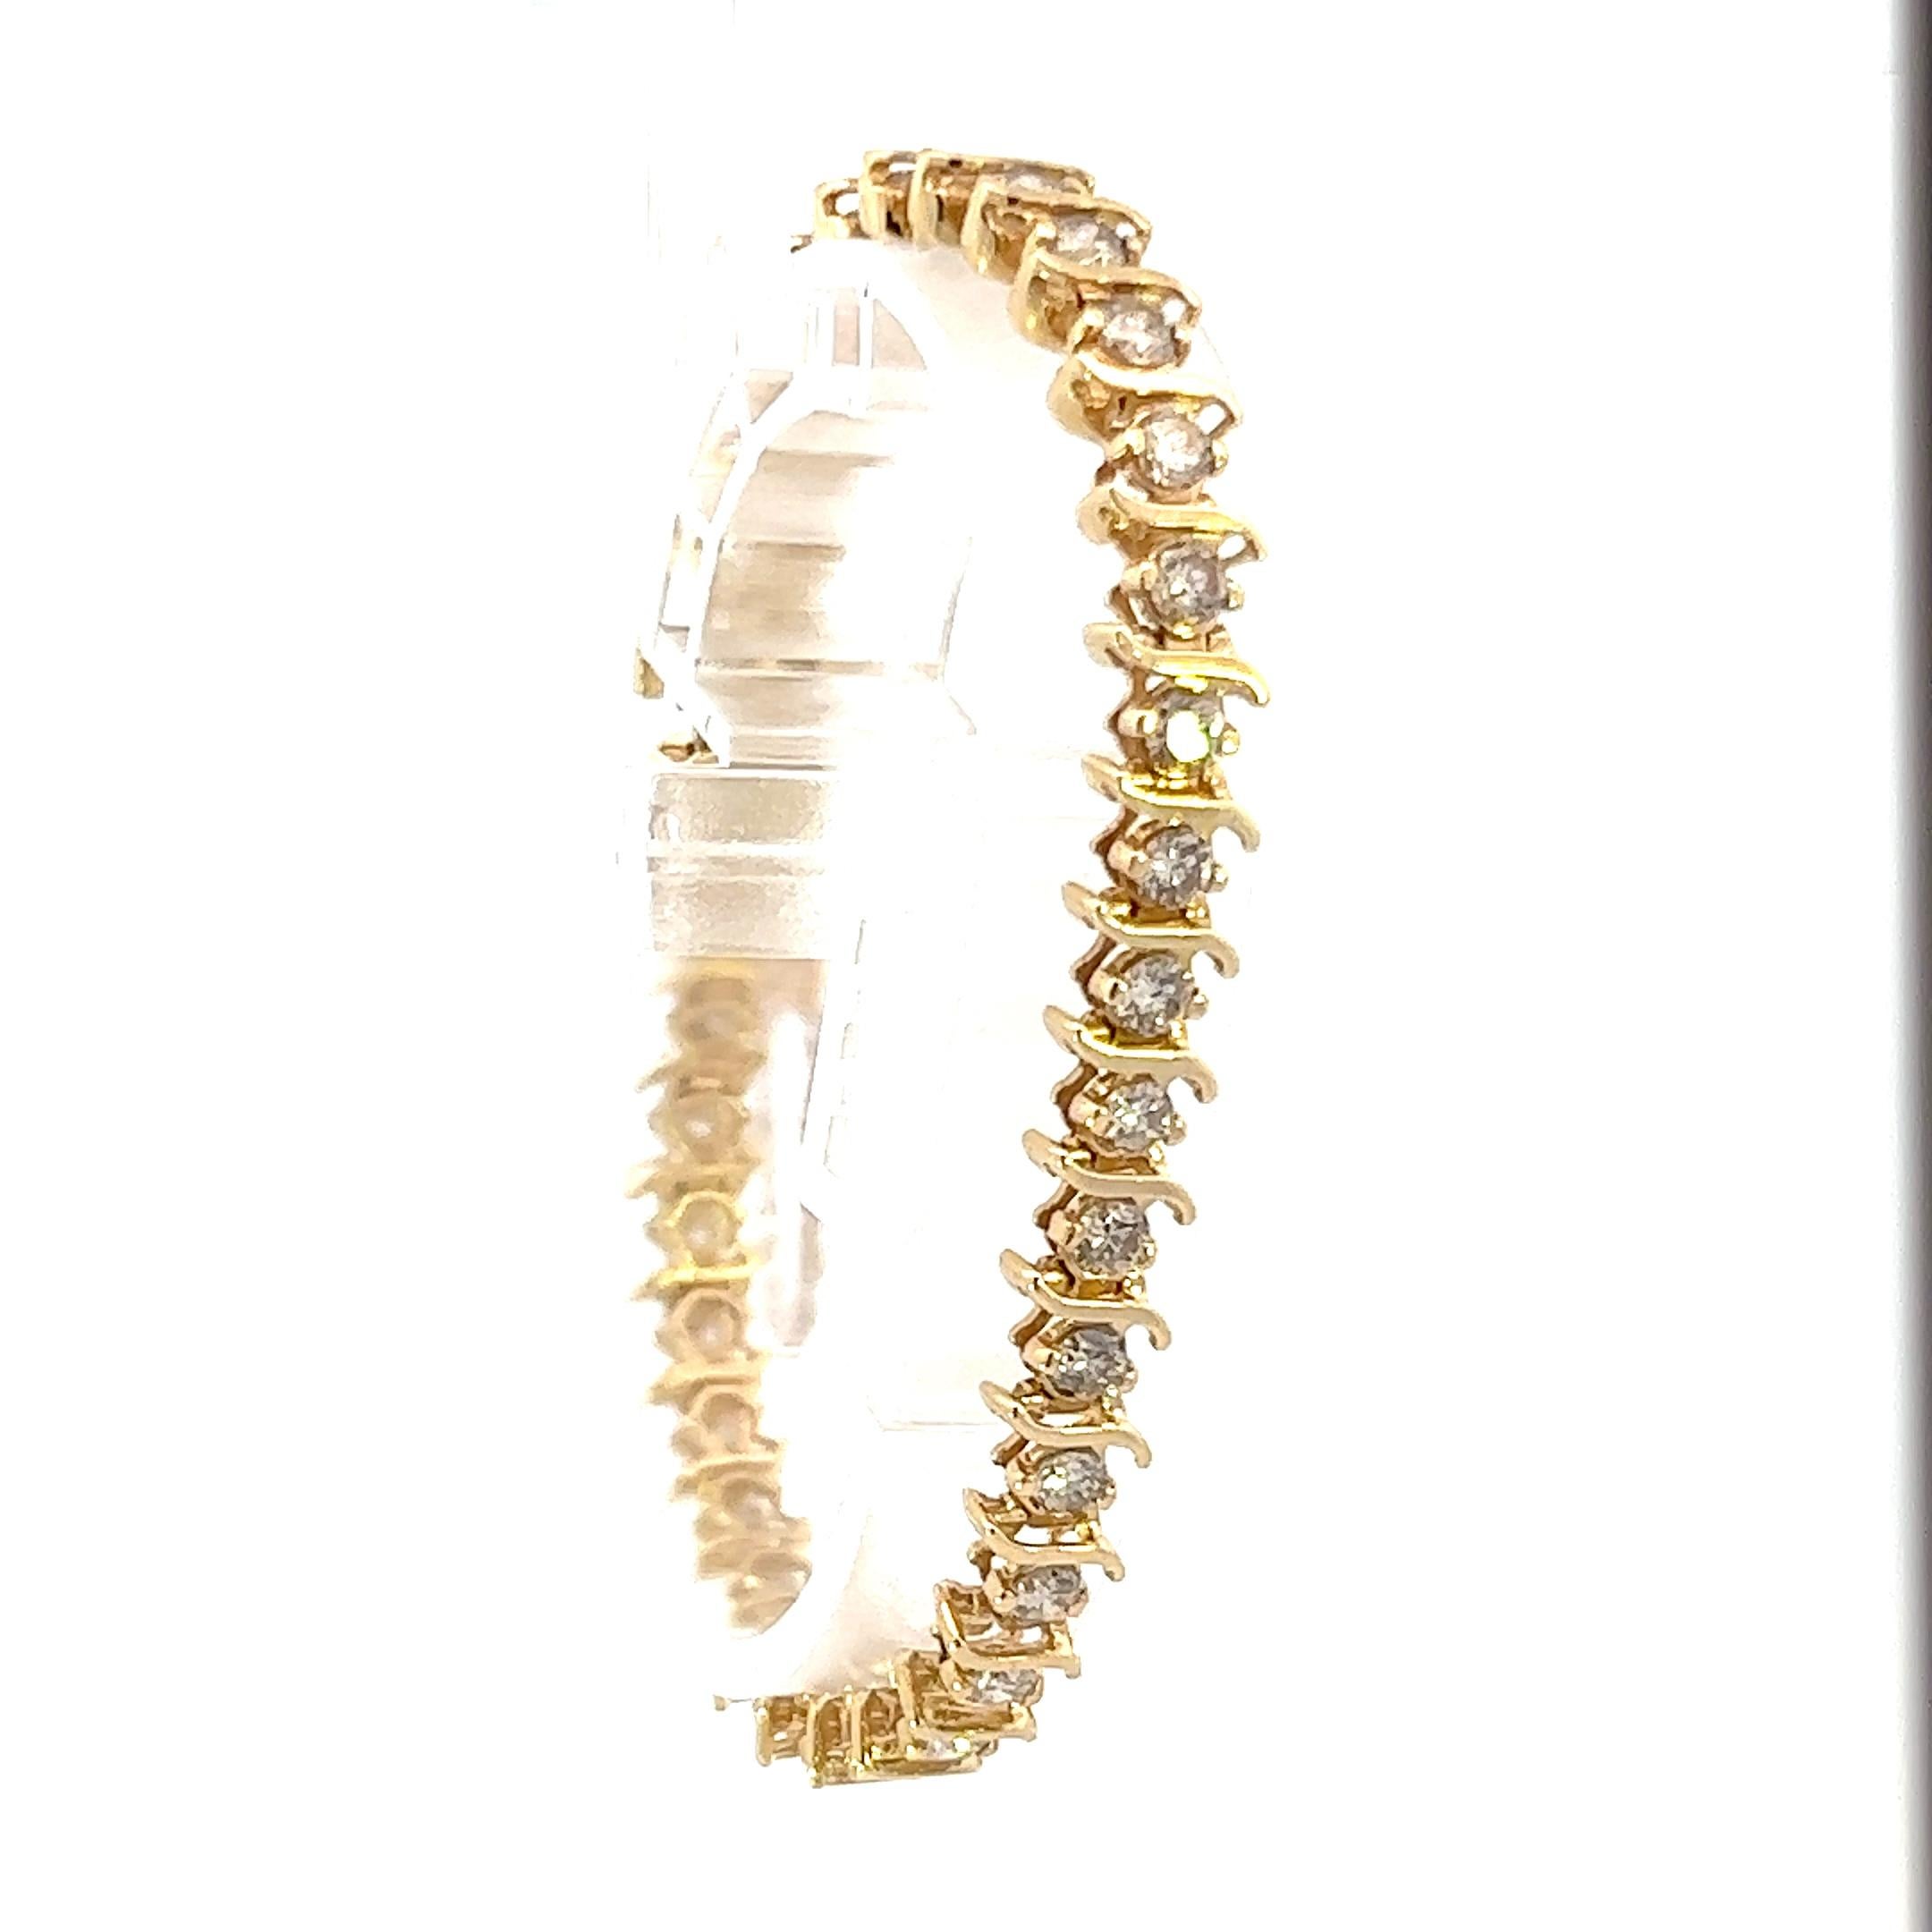 This is a unique 14k yellow gold contemporary diamond bracelet. Being made in 14k yellow gold, this bracelet displays a rich tone and offers timeless appeal. Although this 14k yellow gold bracelet has a classic appeal, it also has a distinctive look